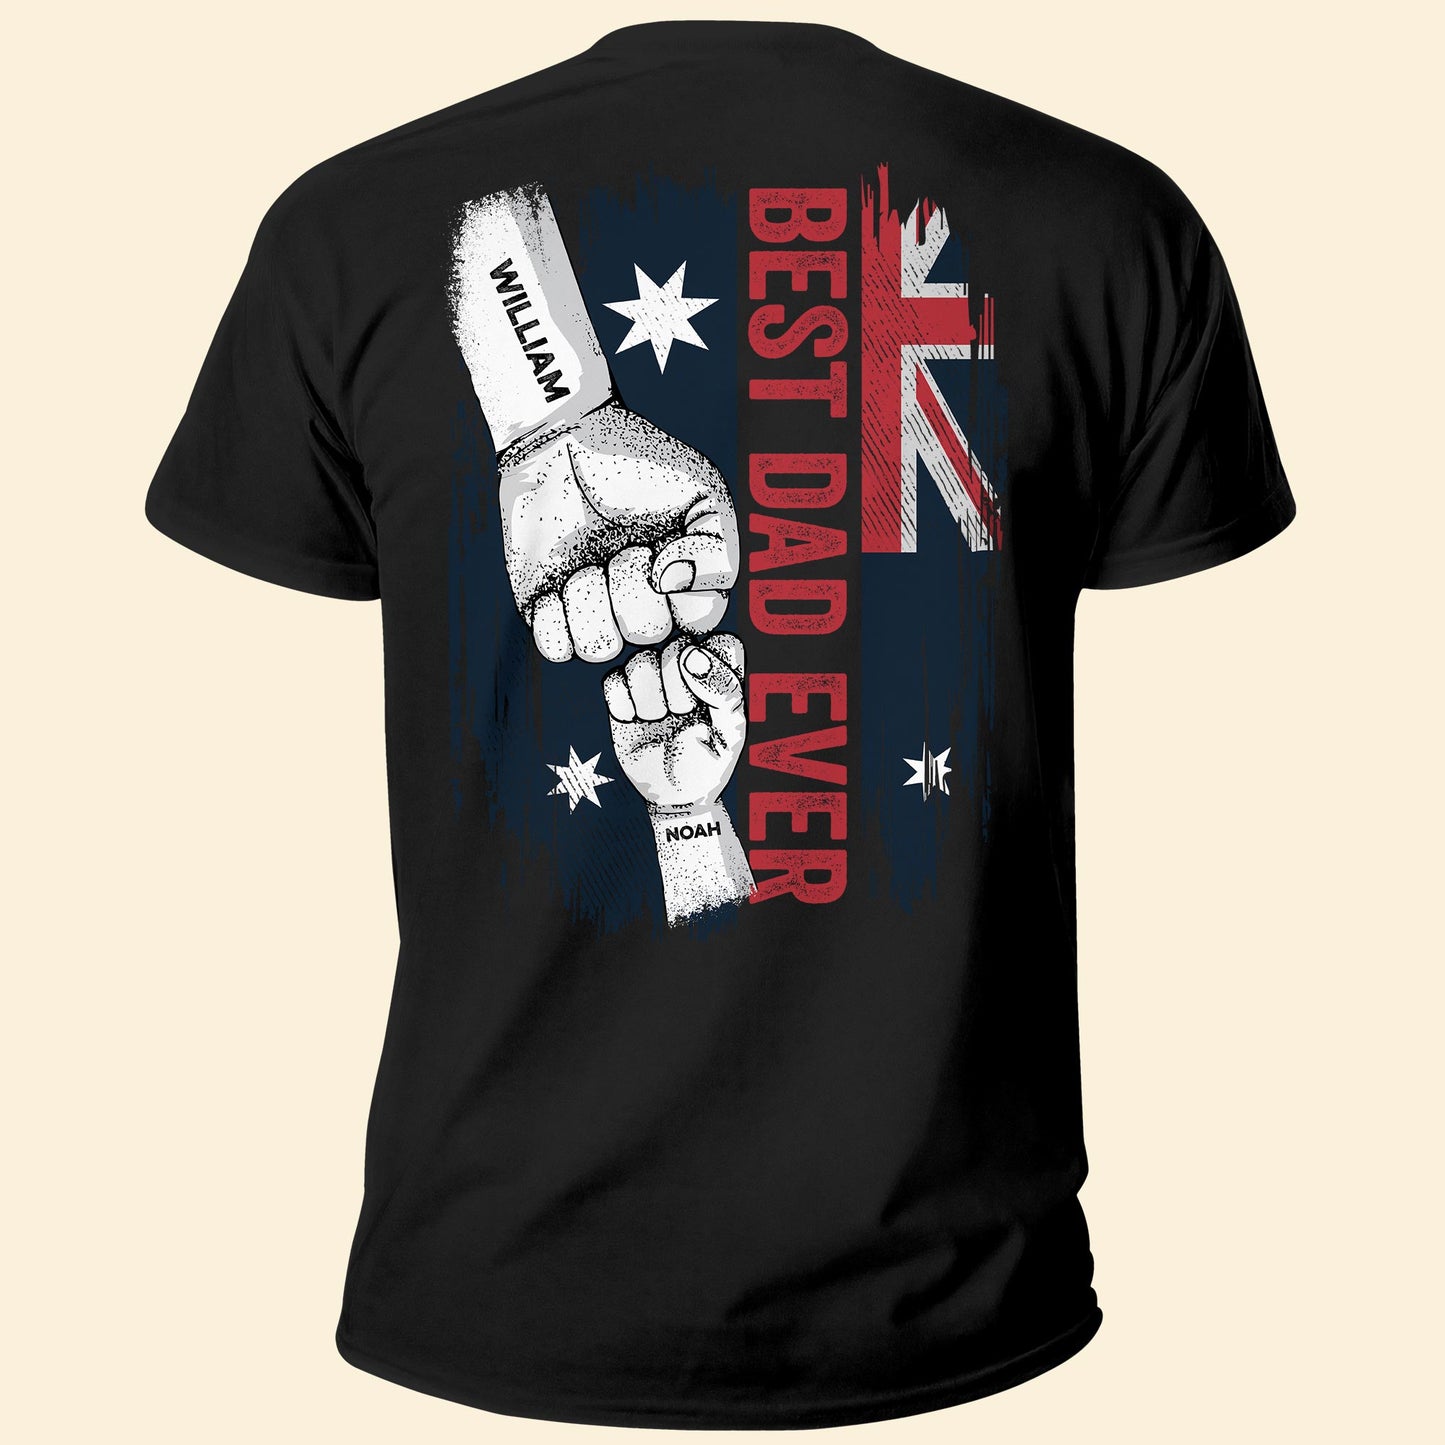 Best Dad Ever - Personalized Shirt - Australia Day Birthday Gift For Dad, Husband, Son